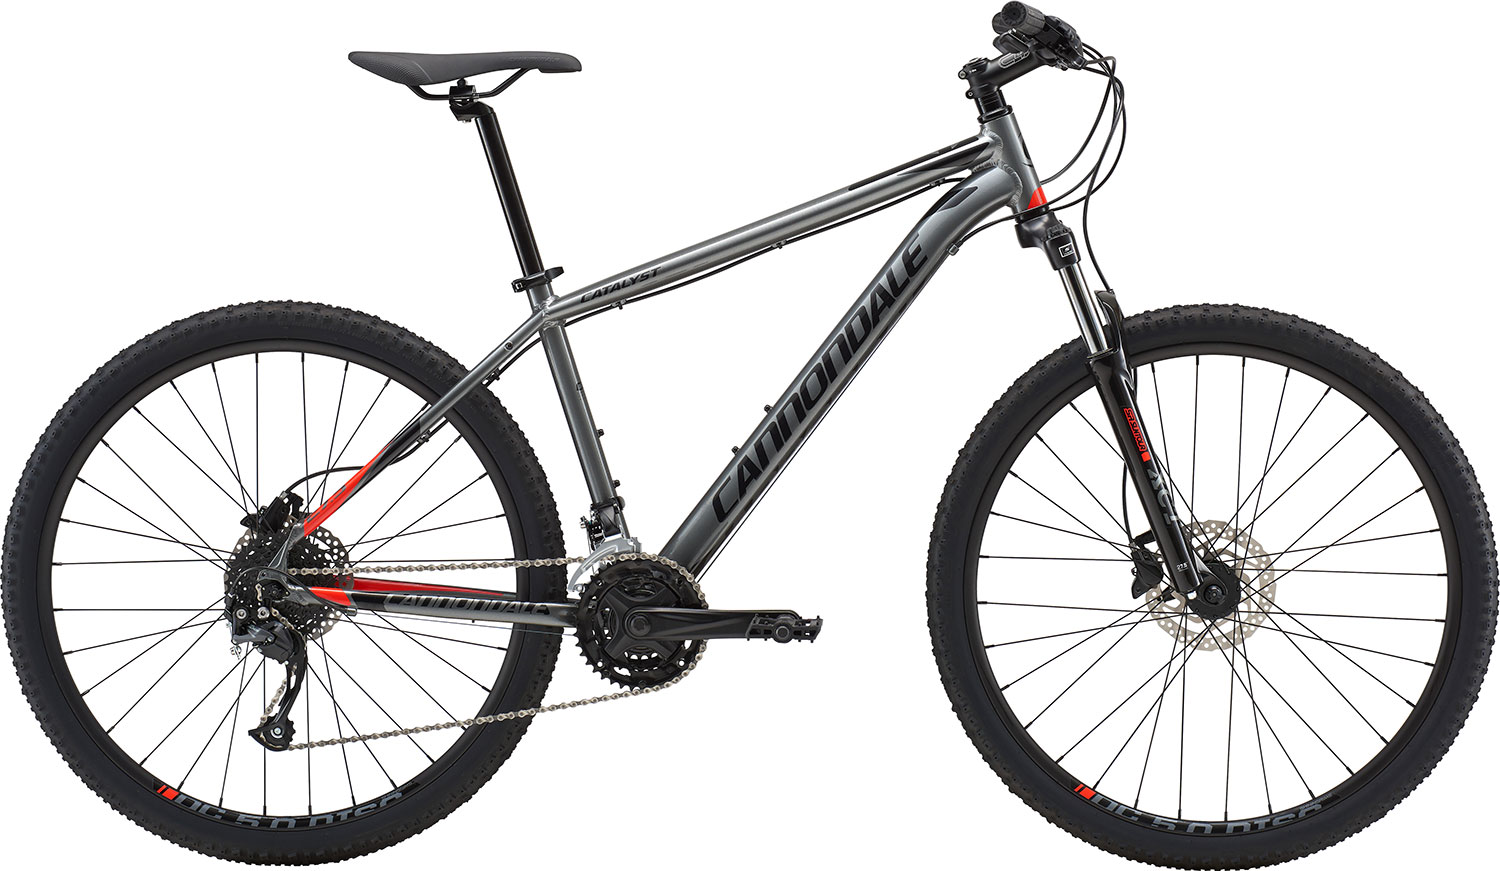 Велосипед 27,5" Cannondale CATALYST 2 рама - L 2018 GRY серый фото 